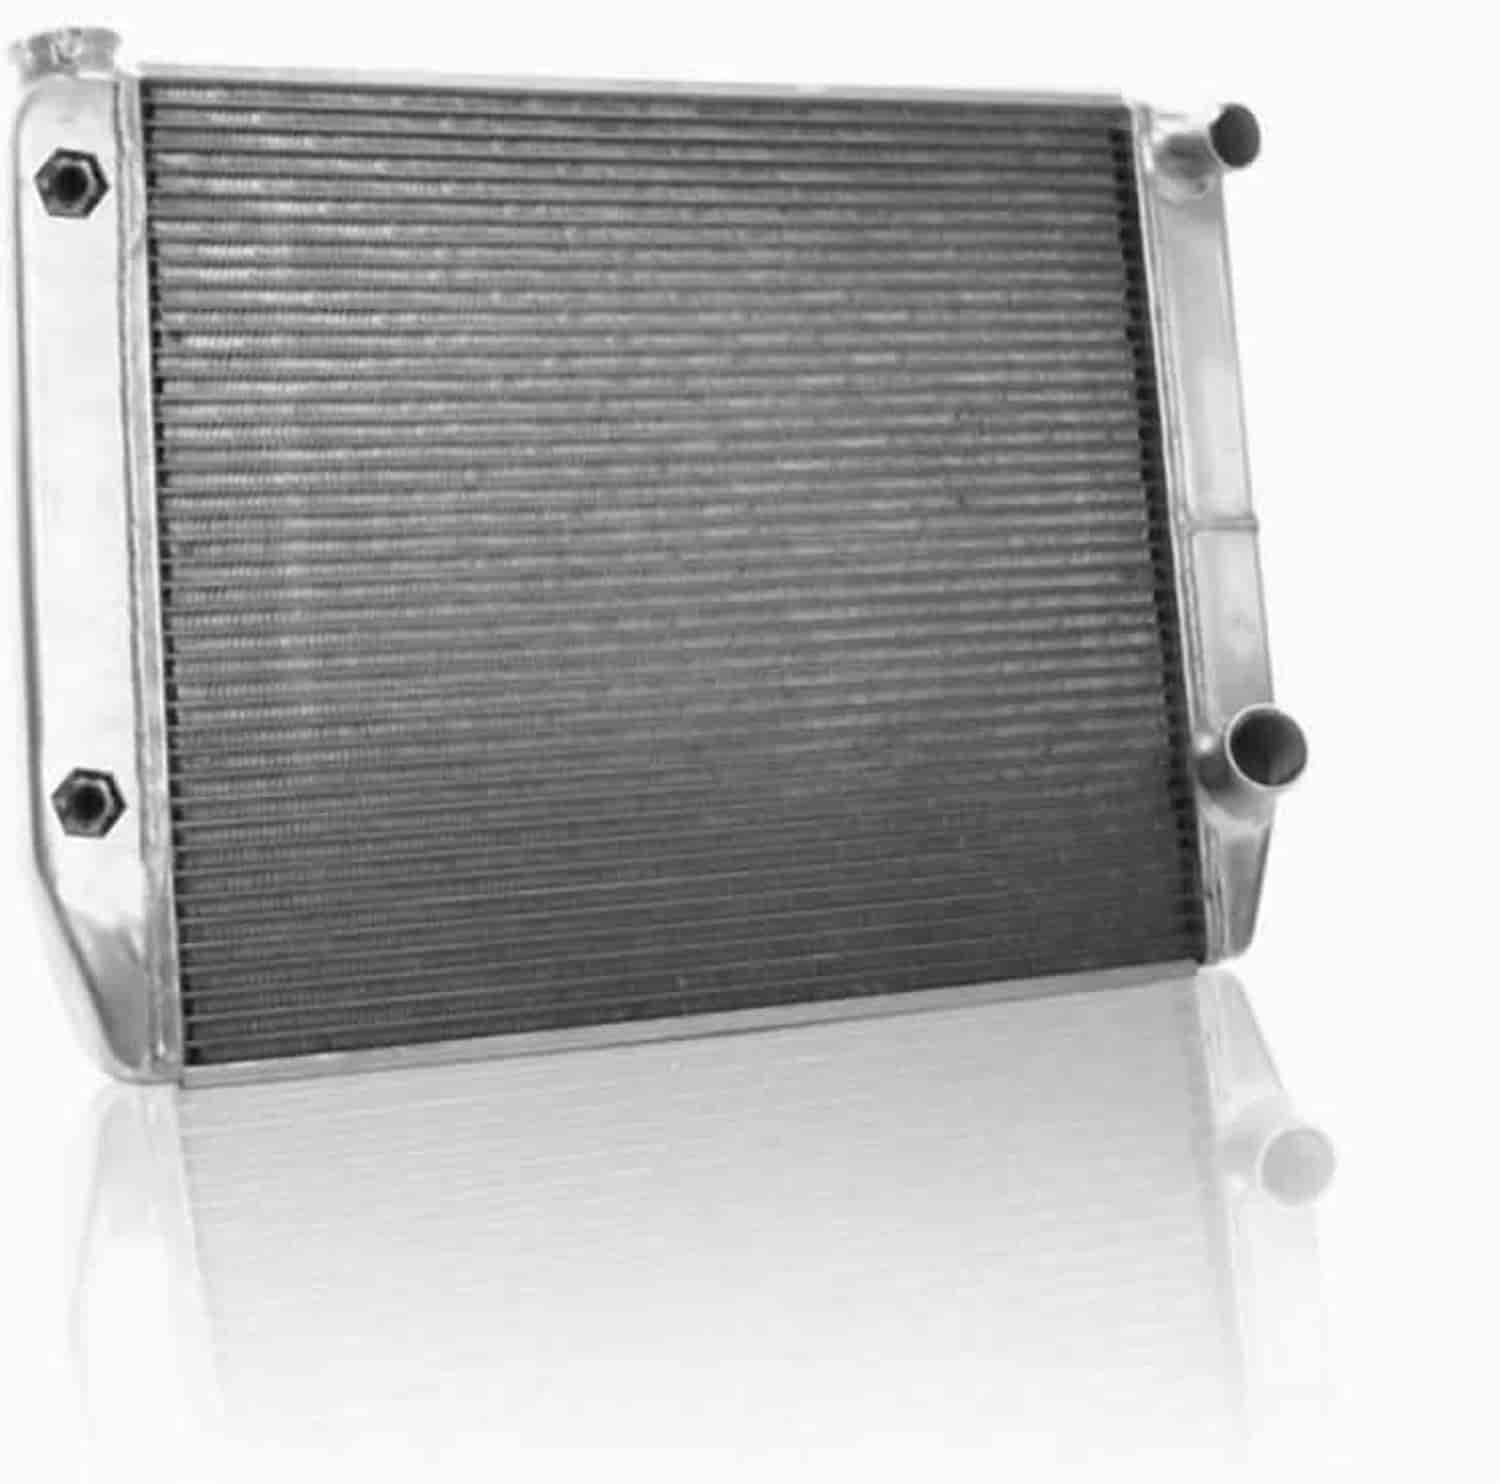 ClassicCool Universal Fit Radiator Dual Pass Crossflow Design 26" x 19" with Transmission Cooler